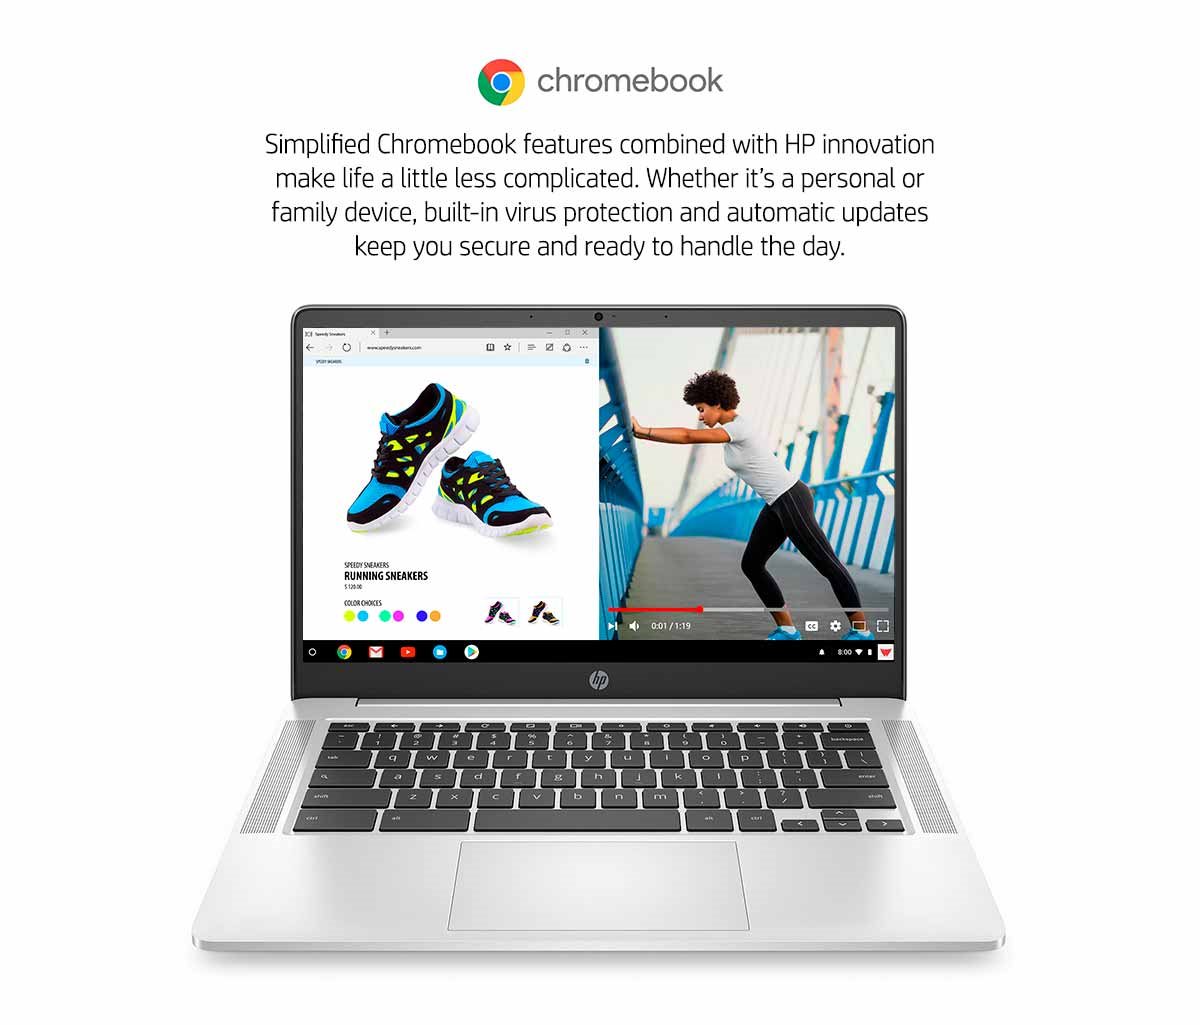 Silver Chromebook 14 shows a sneaker focused website.